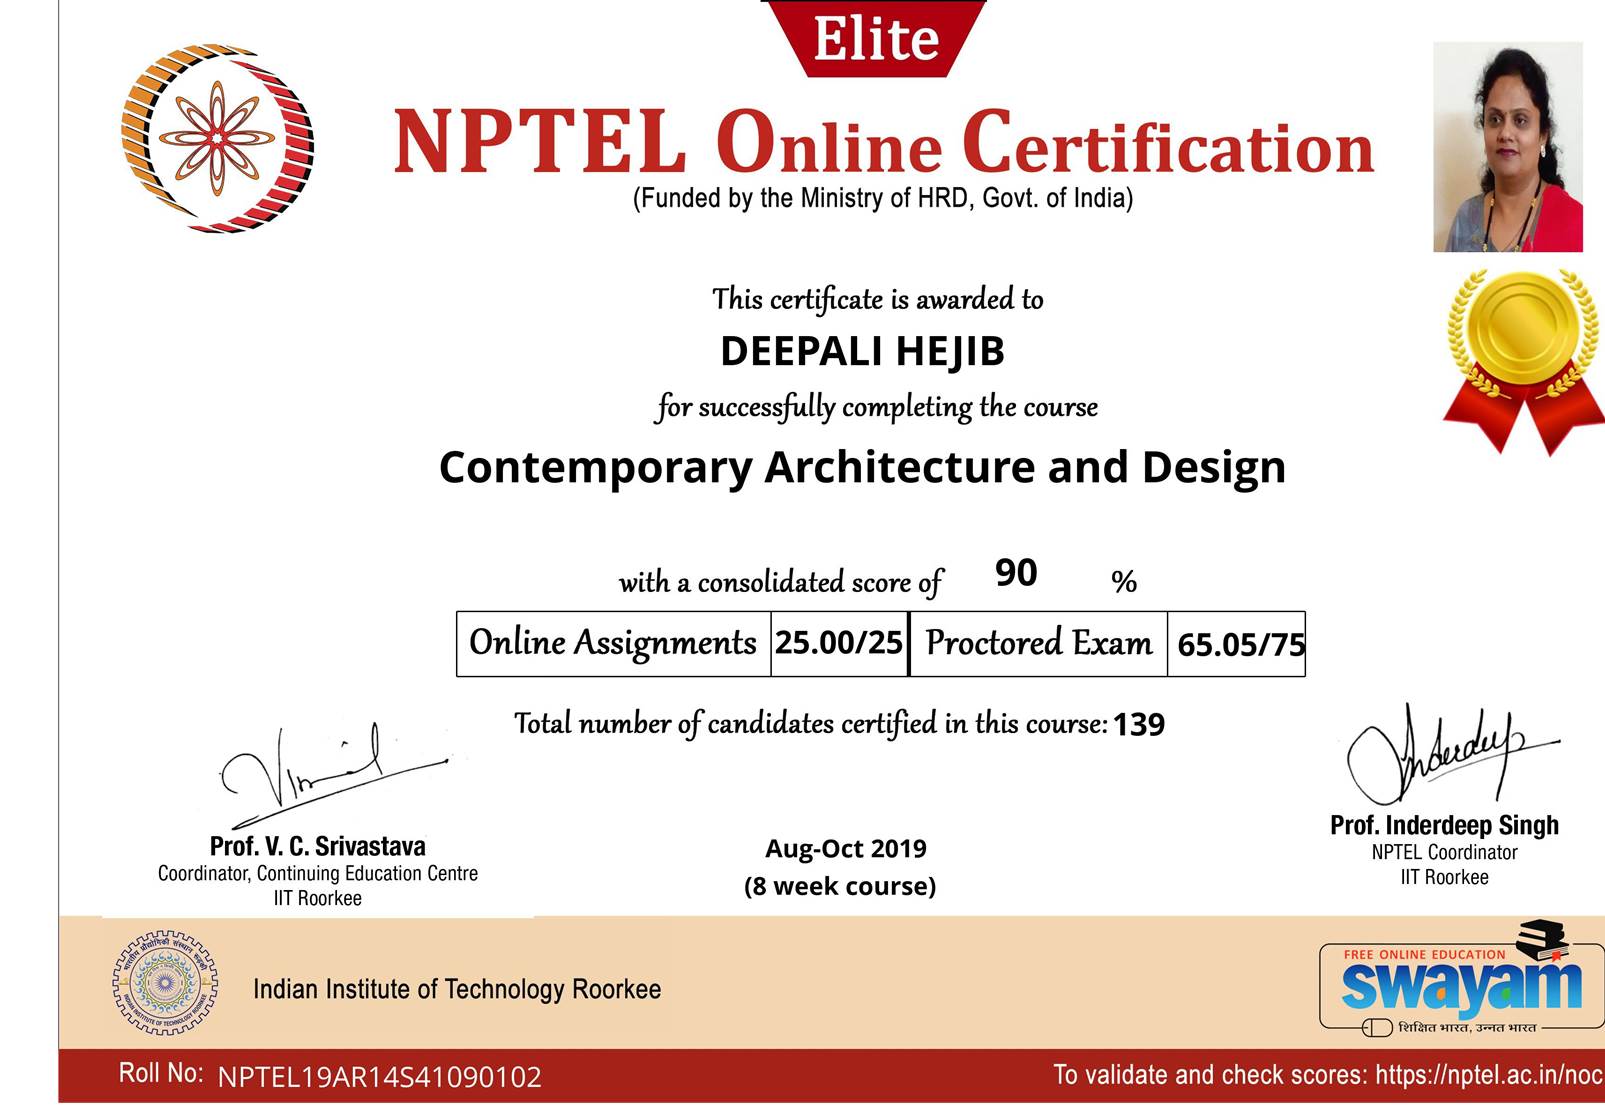 NPTEL certification  of certified candidates